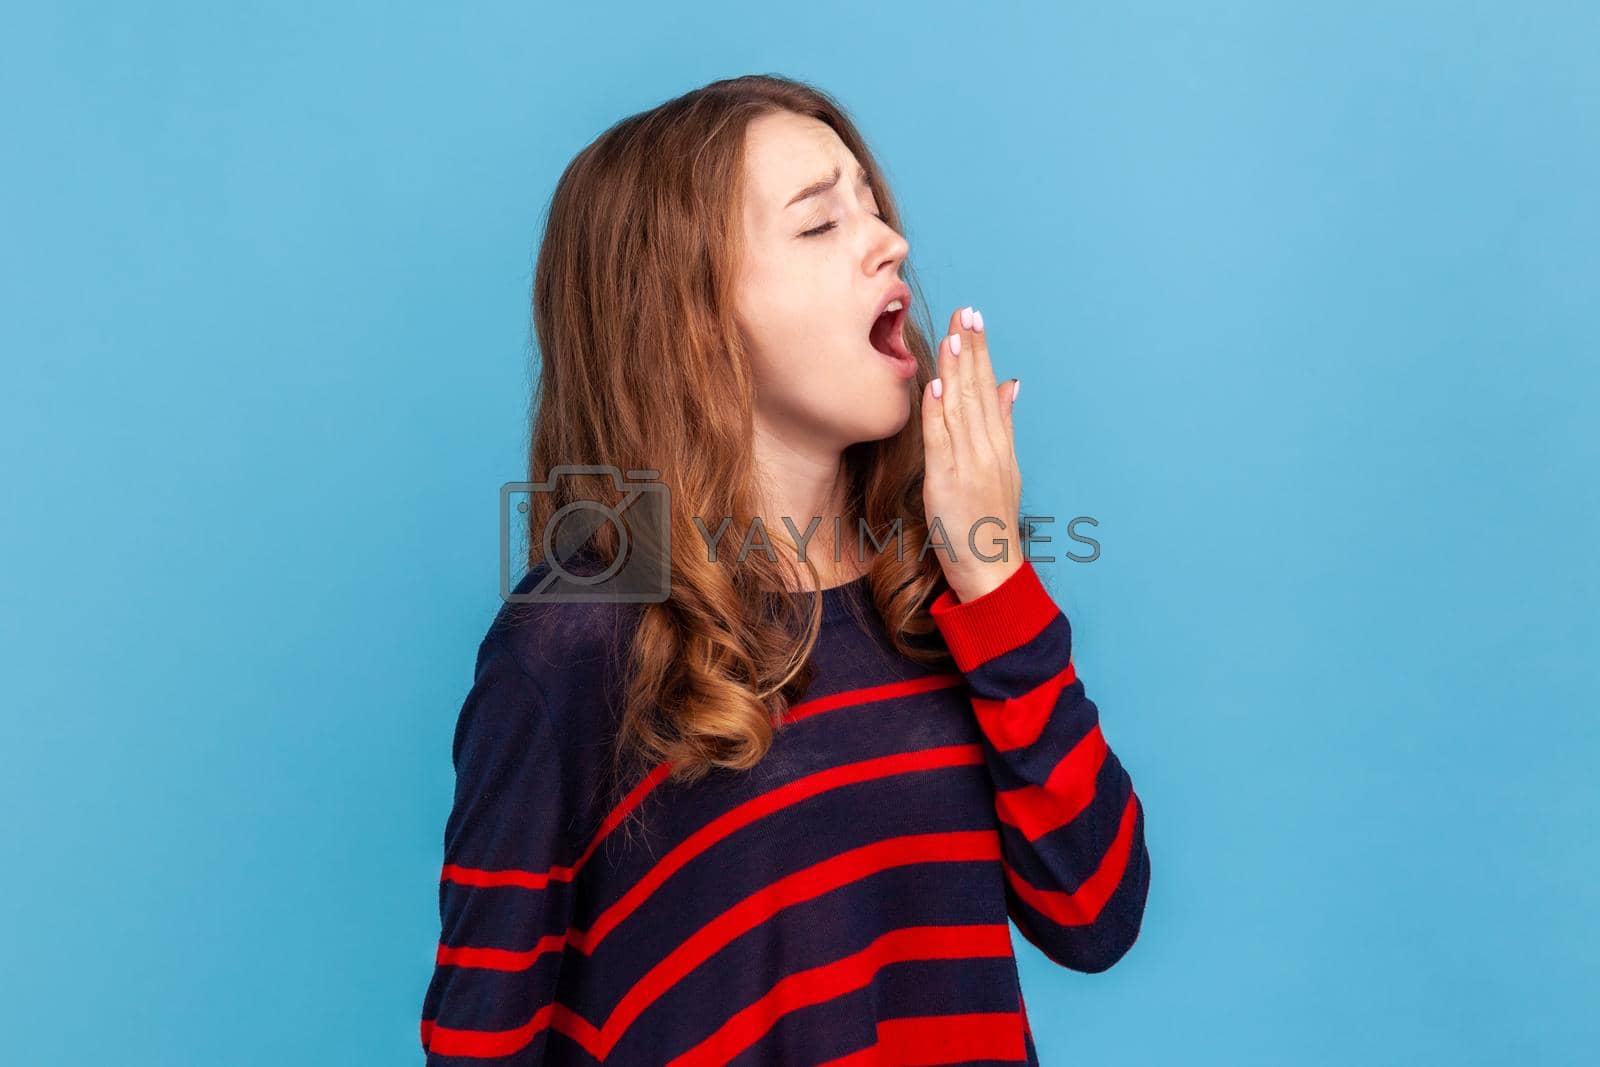 Royalty free image of Woman yawning and covering mouth with palm, lack of sleep, fatigue concept. by Khosro1